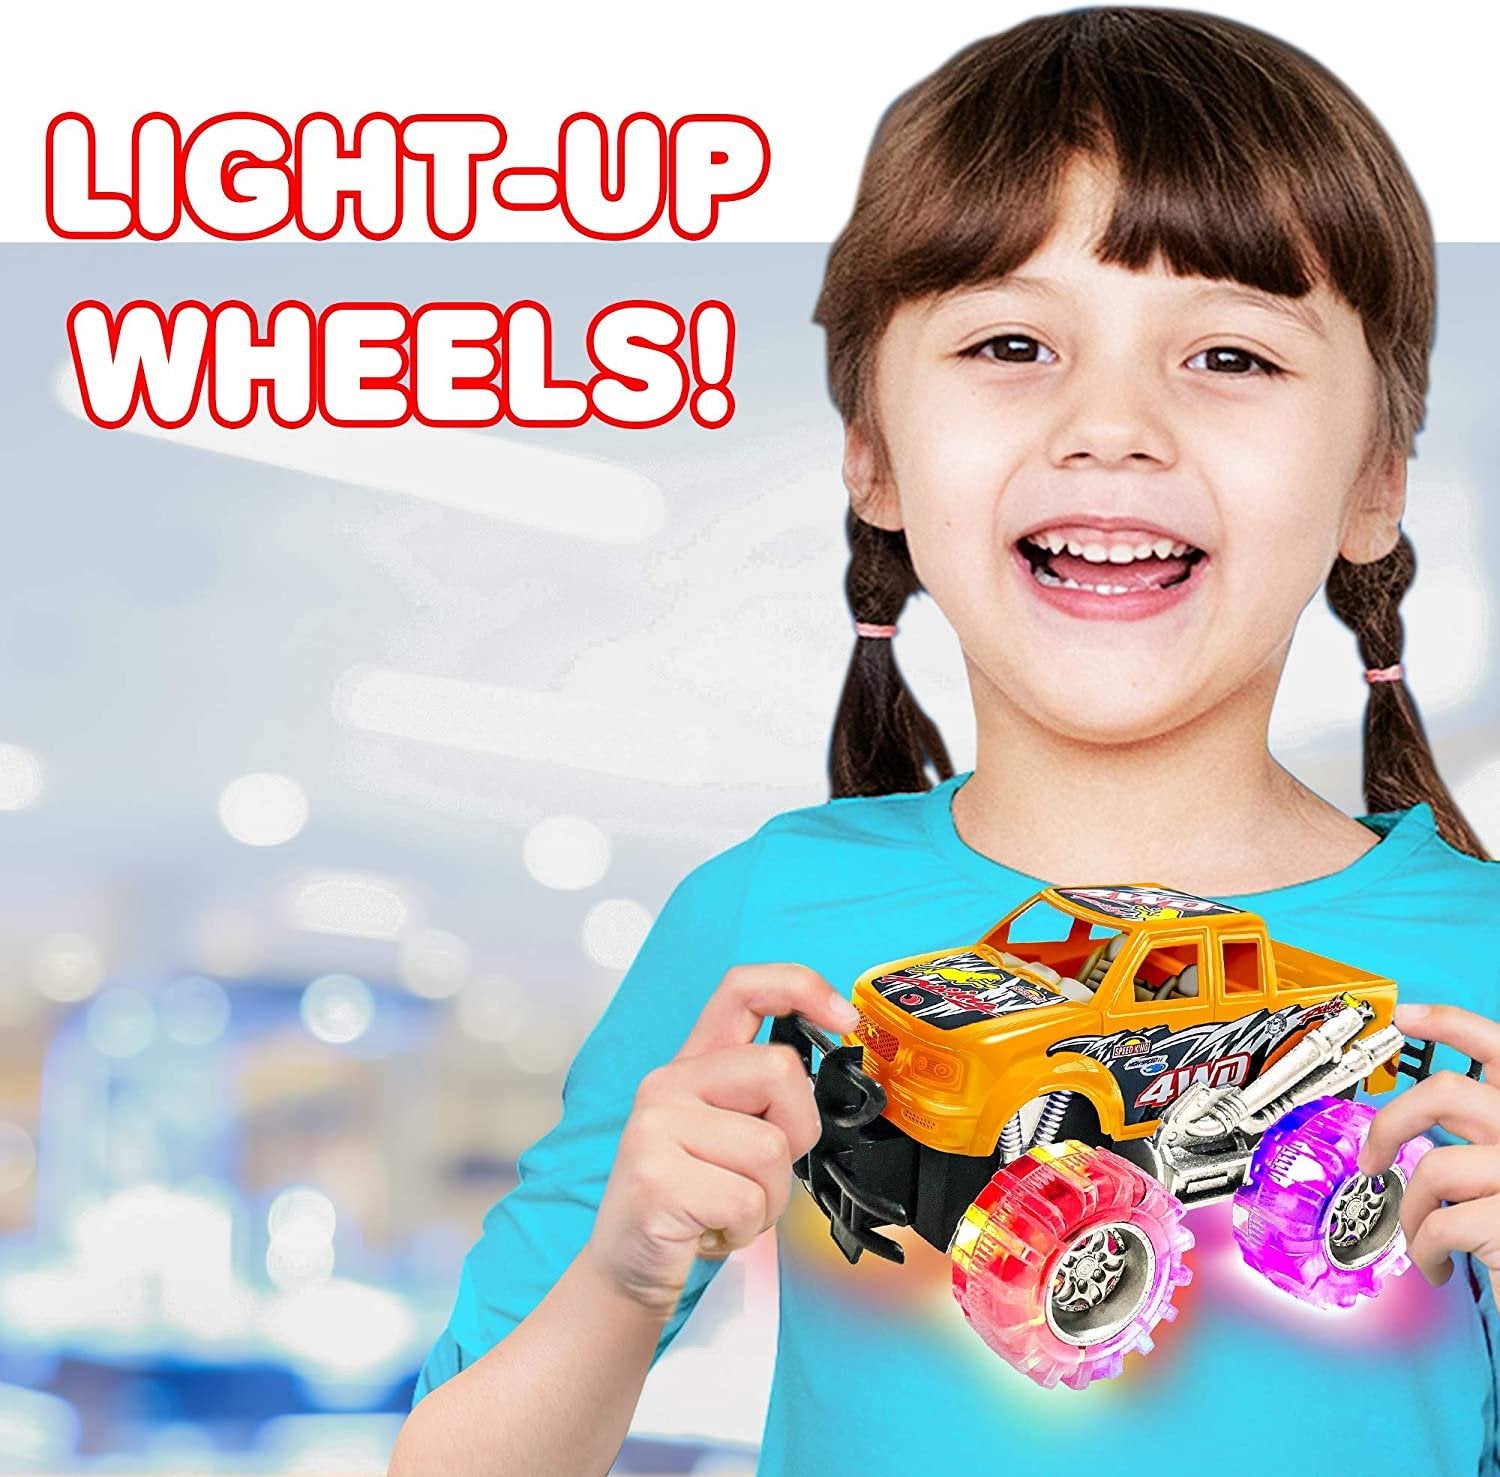 Orange and White Light Up Monster Truck Set for Boys and Girls, Set Includes 2, 6" Monster Trucks with Beautiful Flashing LED Tires, Push n Go Toy Cars, Best Gift for Kids Ages 3+